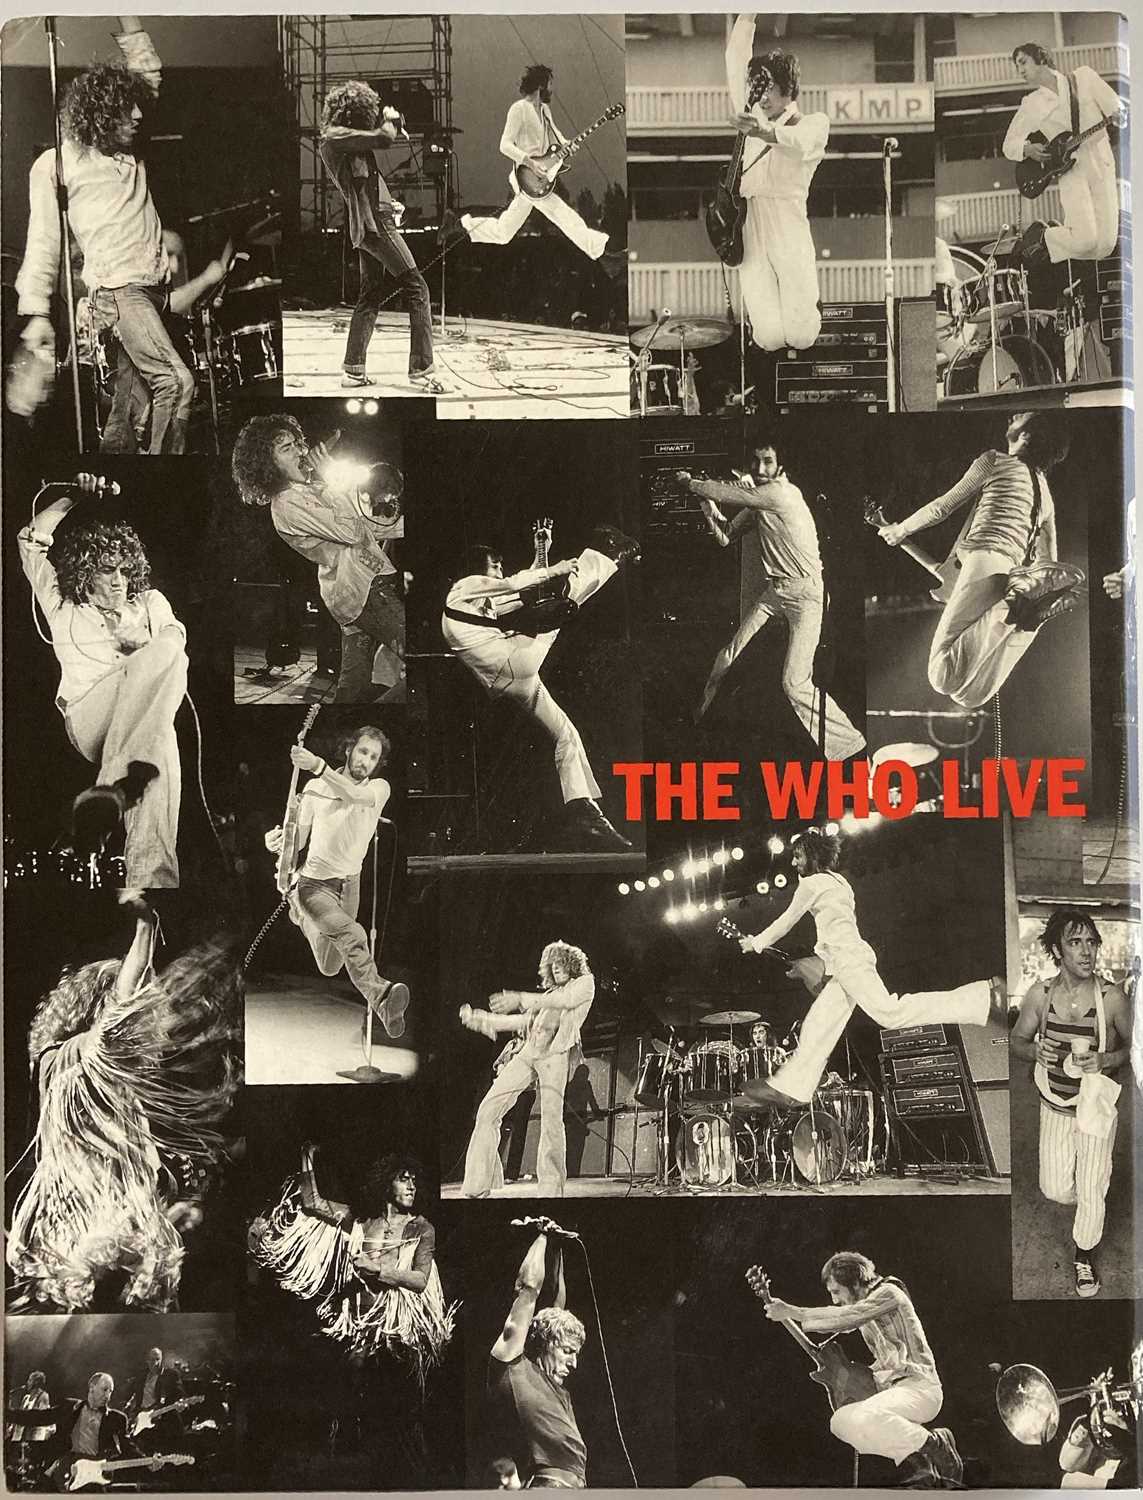 Lot 97 - ROSS HALFIN - THE WHO LIVE - SIGNED BOOK.